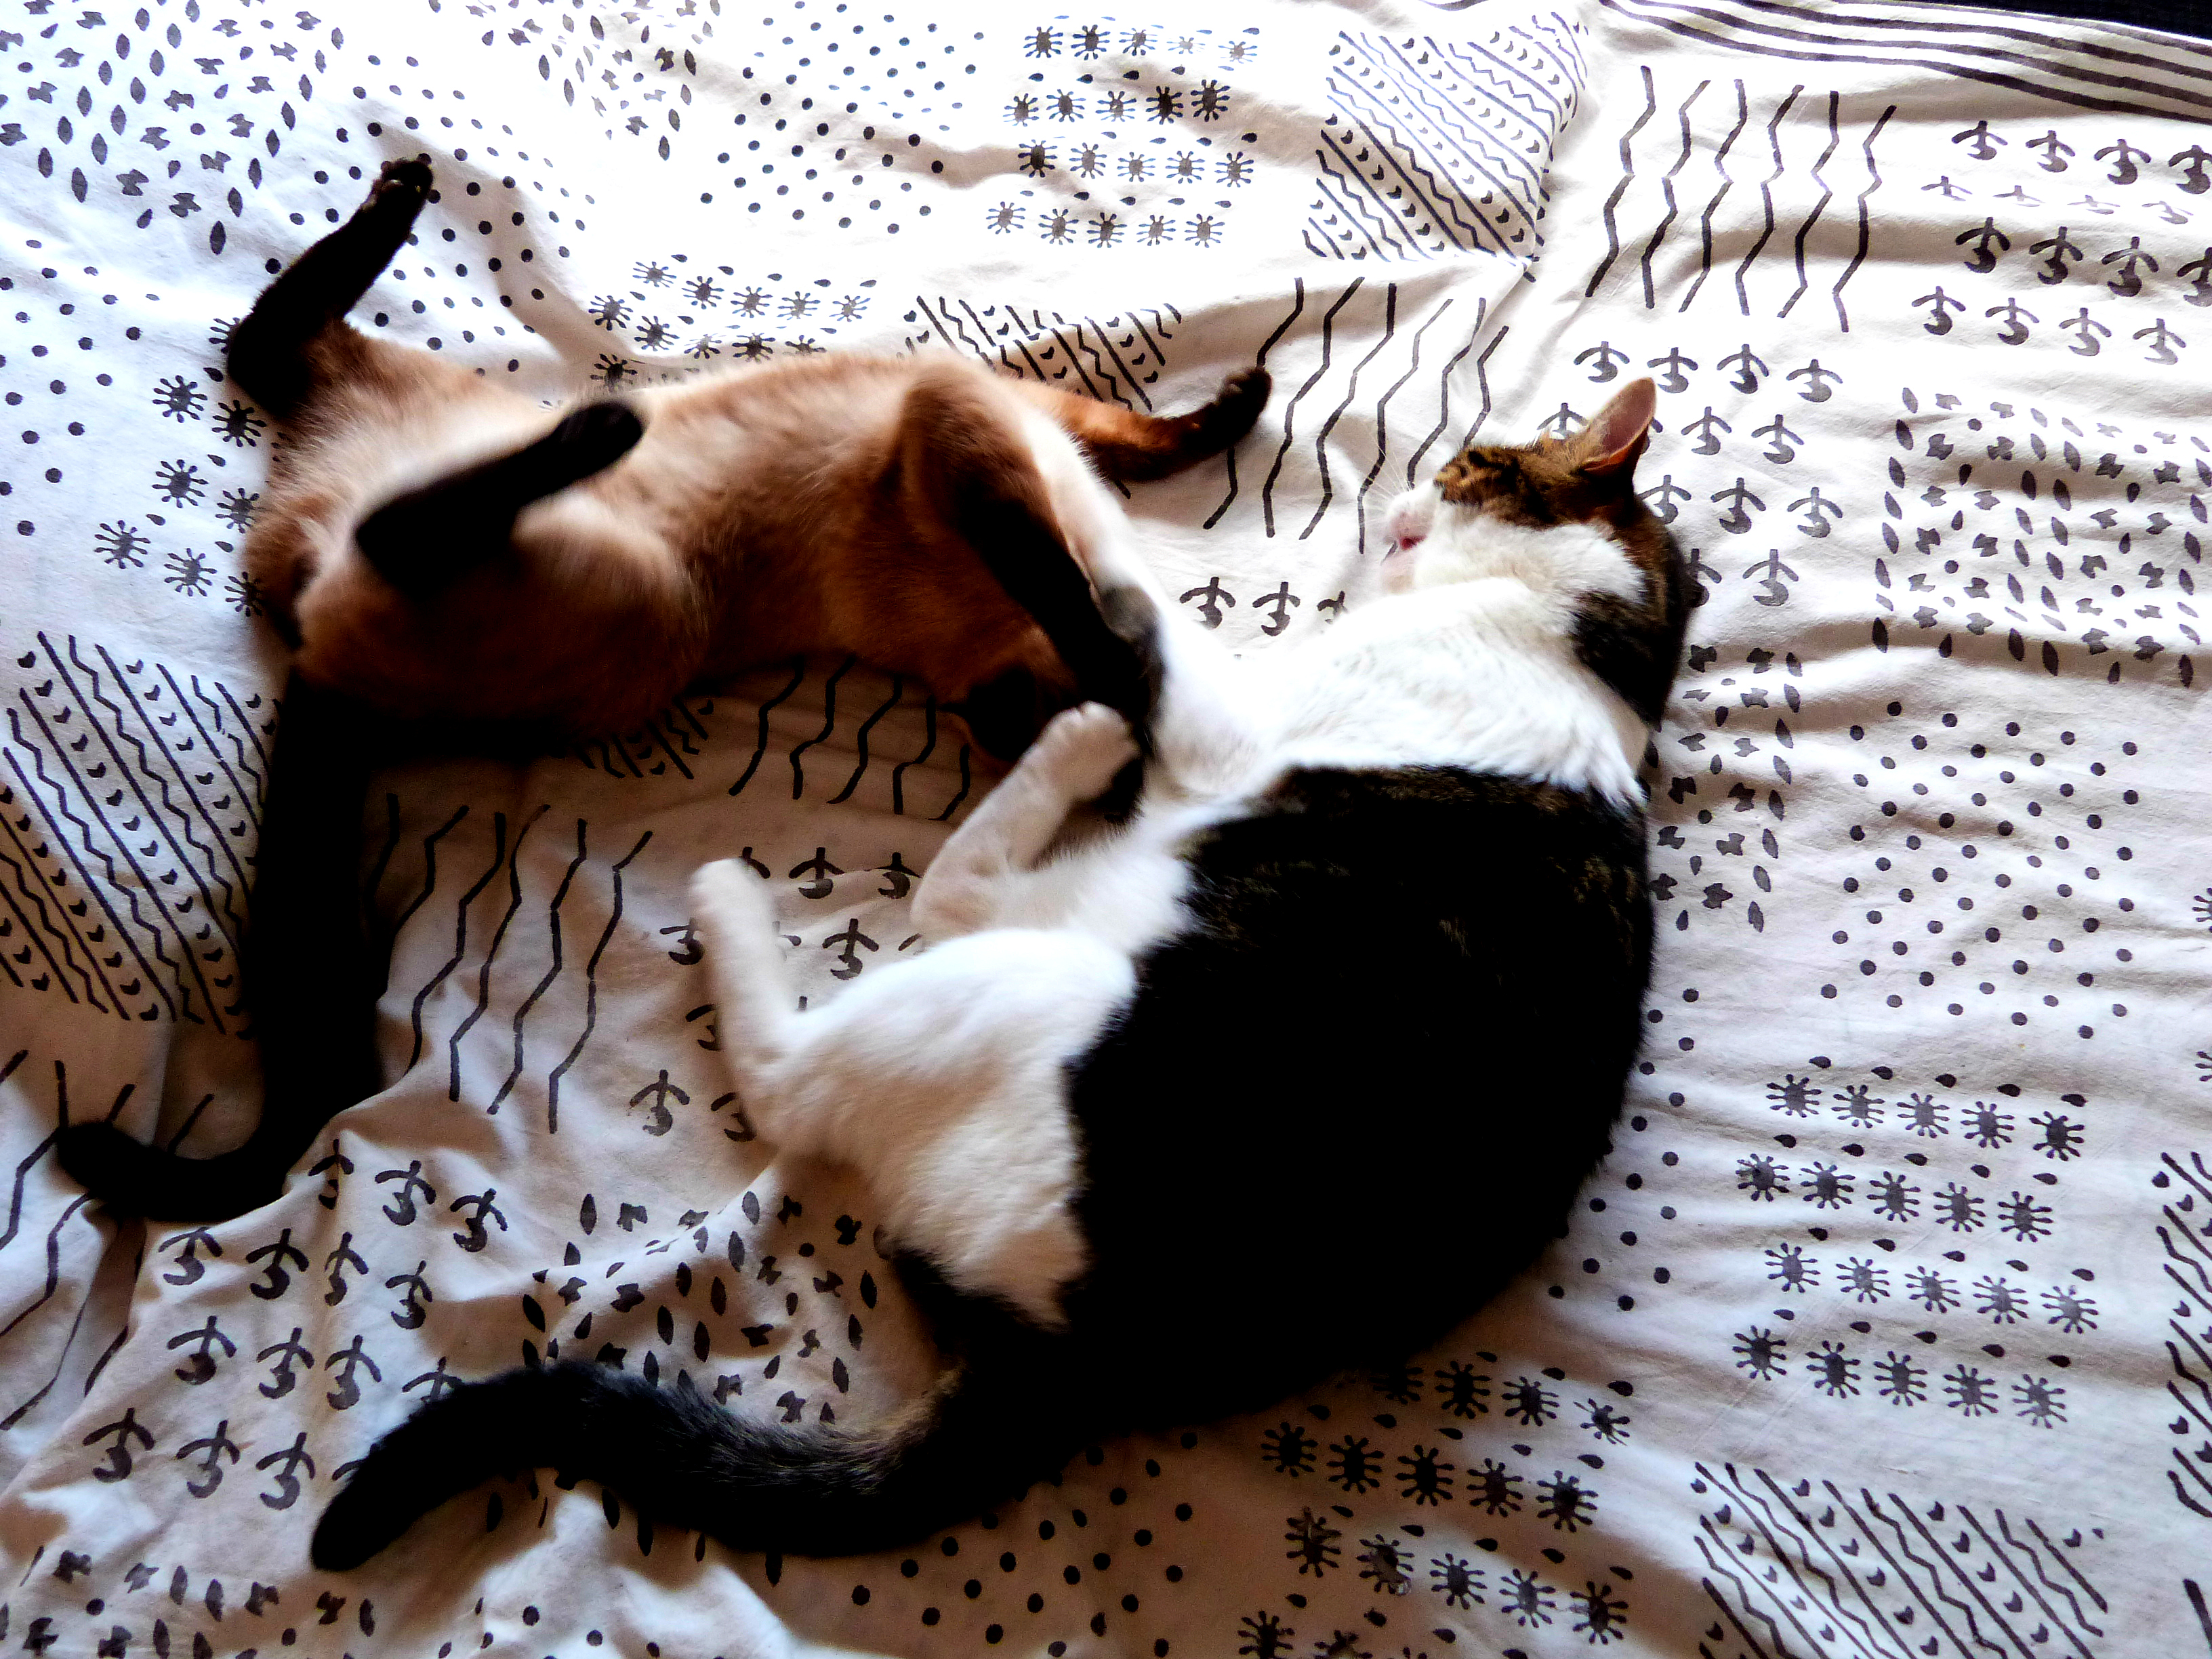 Nap time playfighting, Animal, Bunny, Cat, Cats, HQ Photo